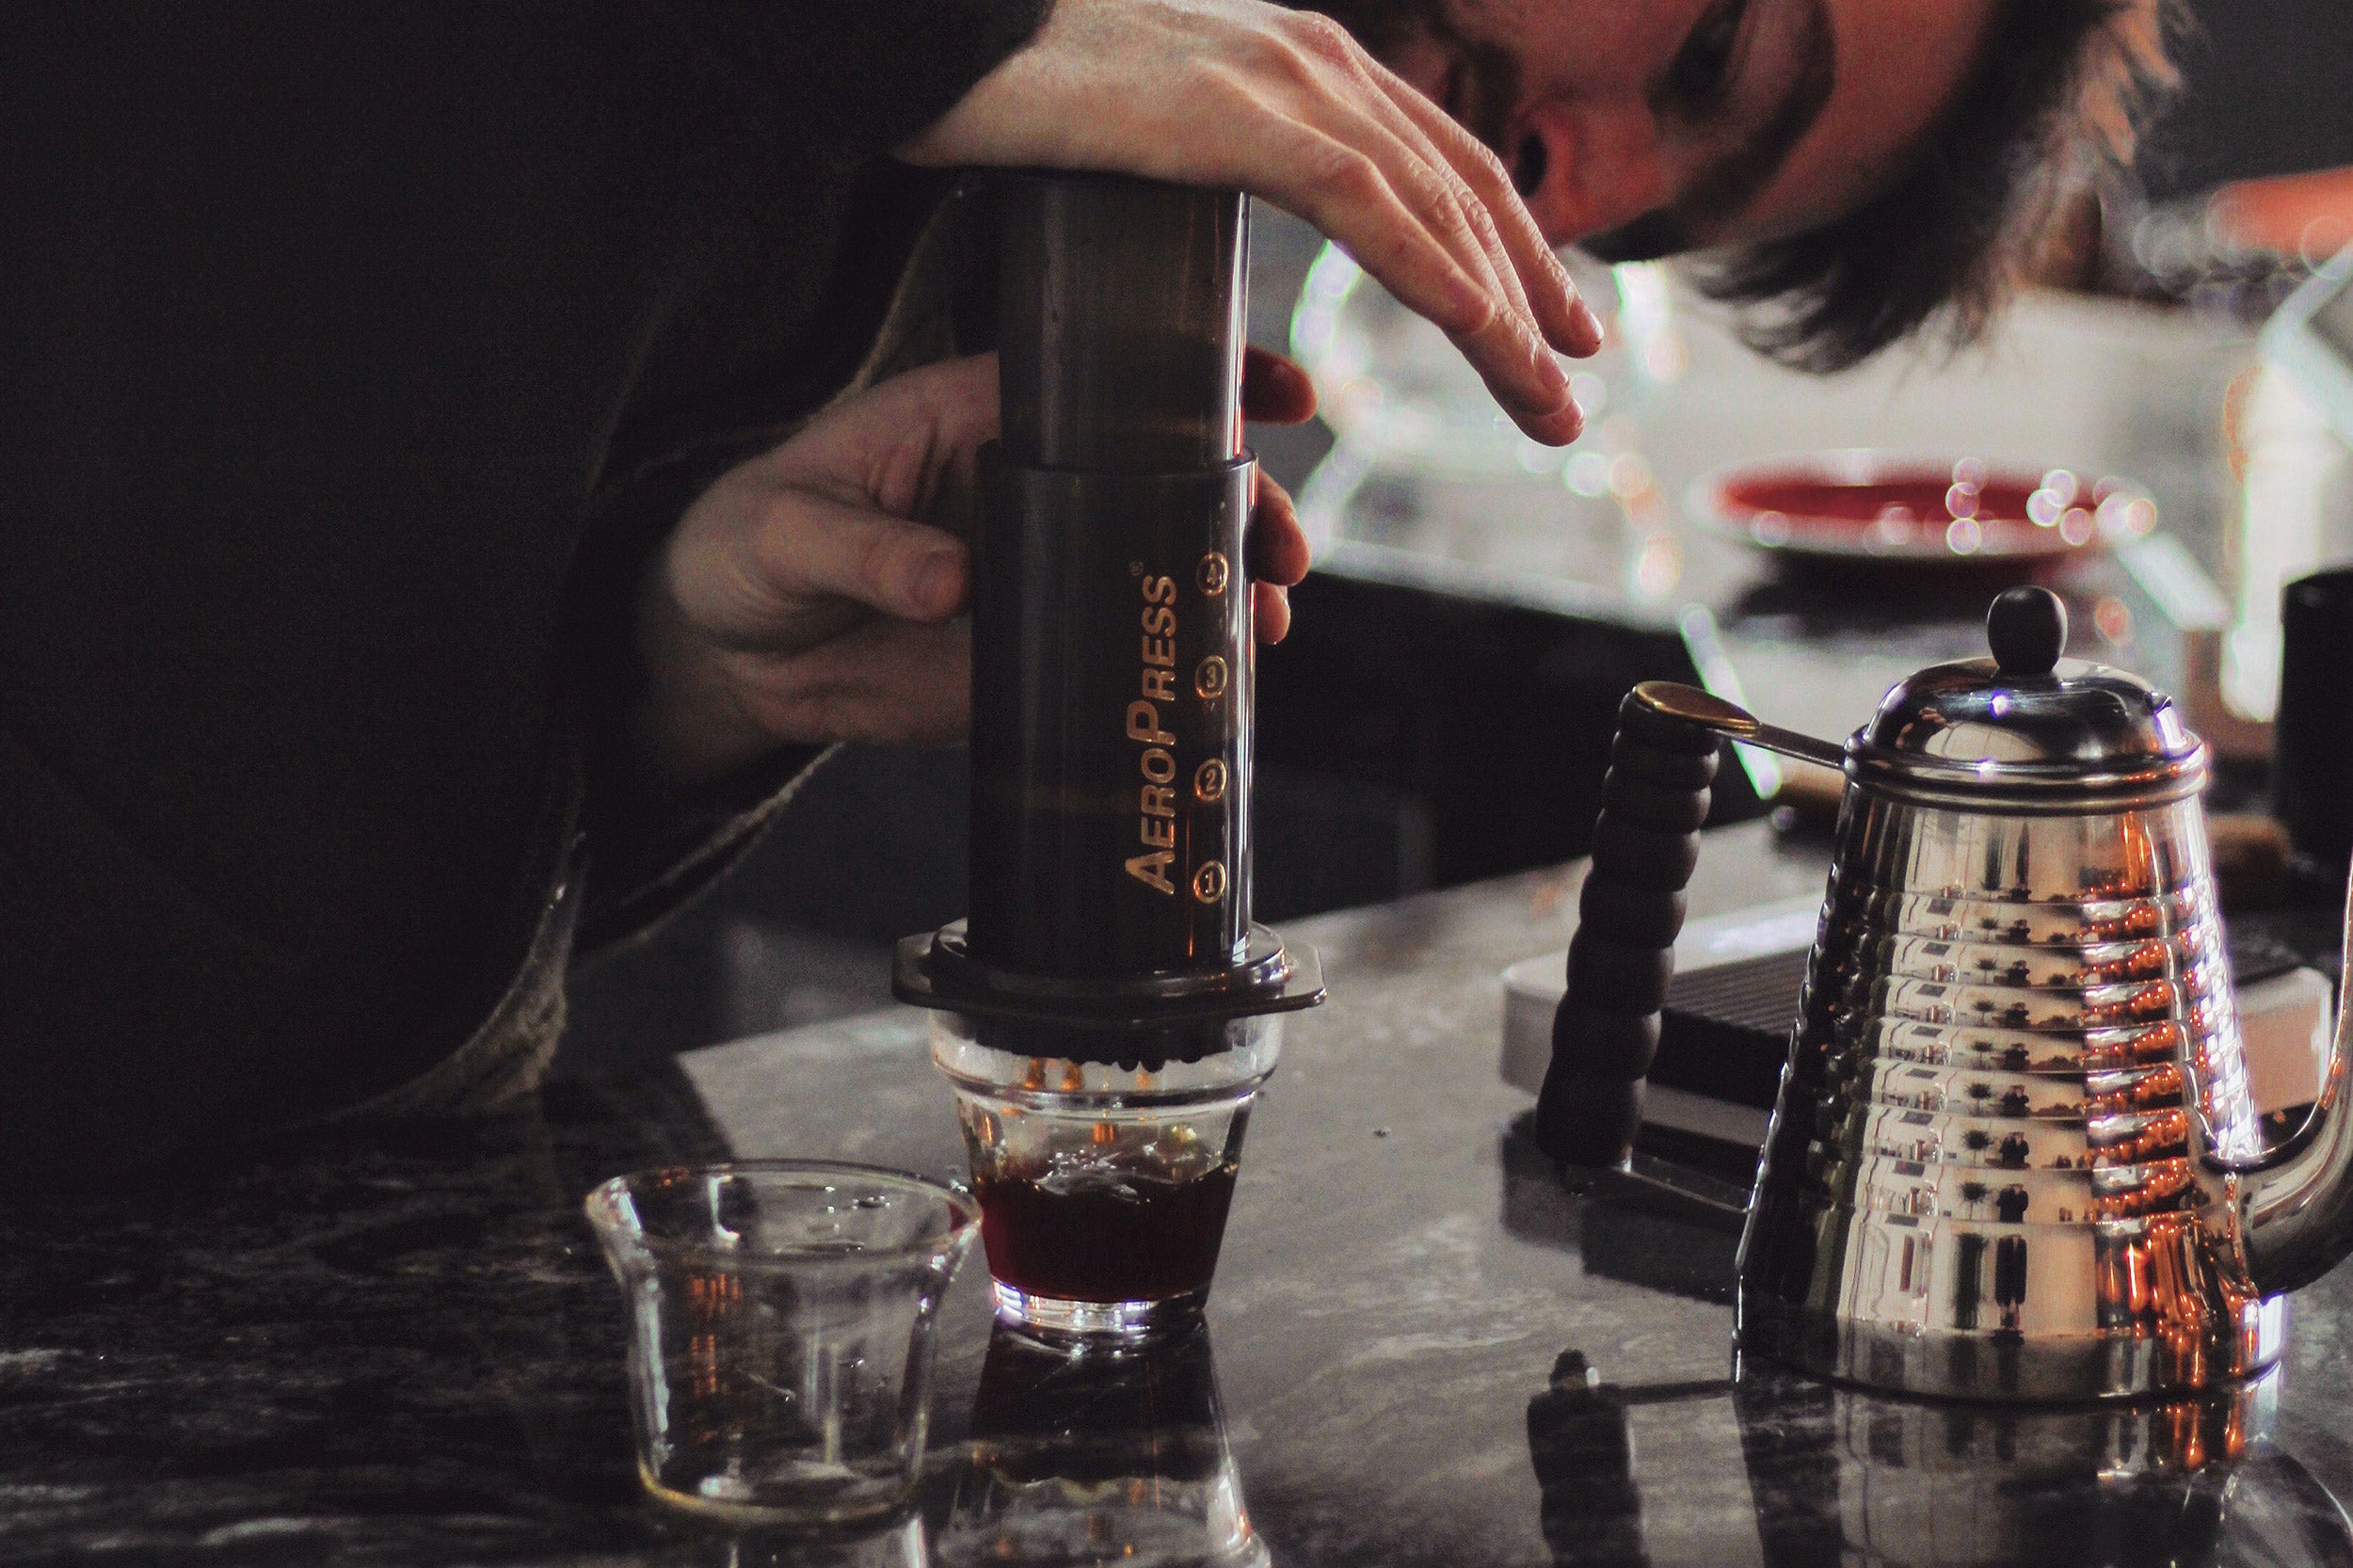 A beginners guide to brewing Aeropress